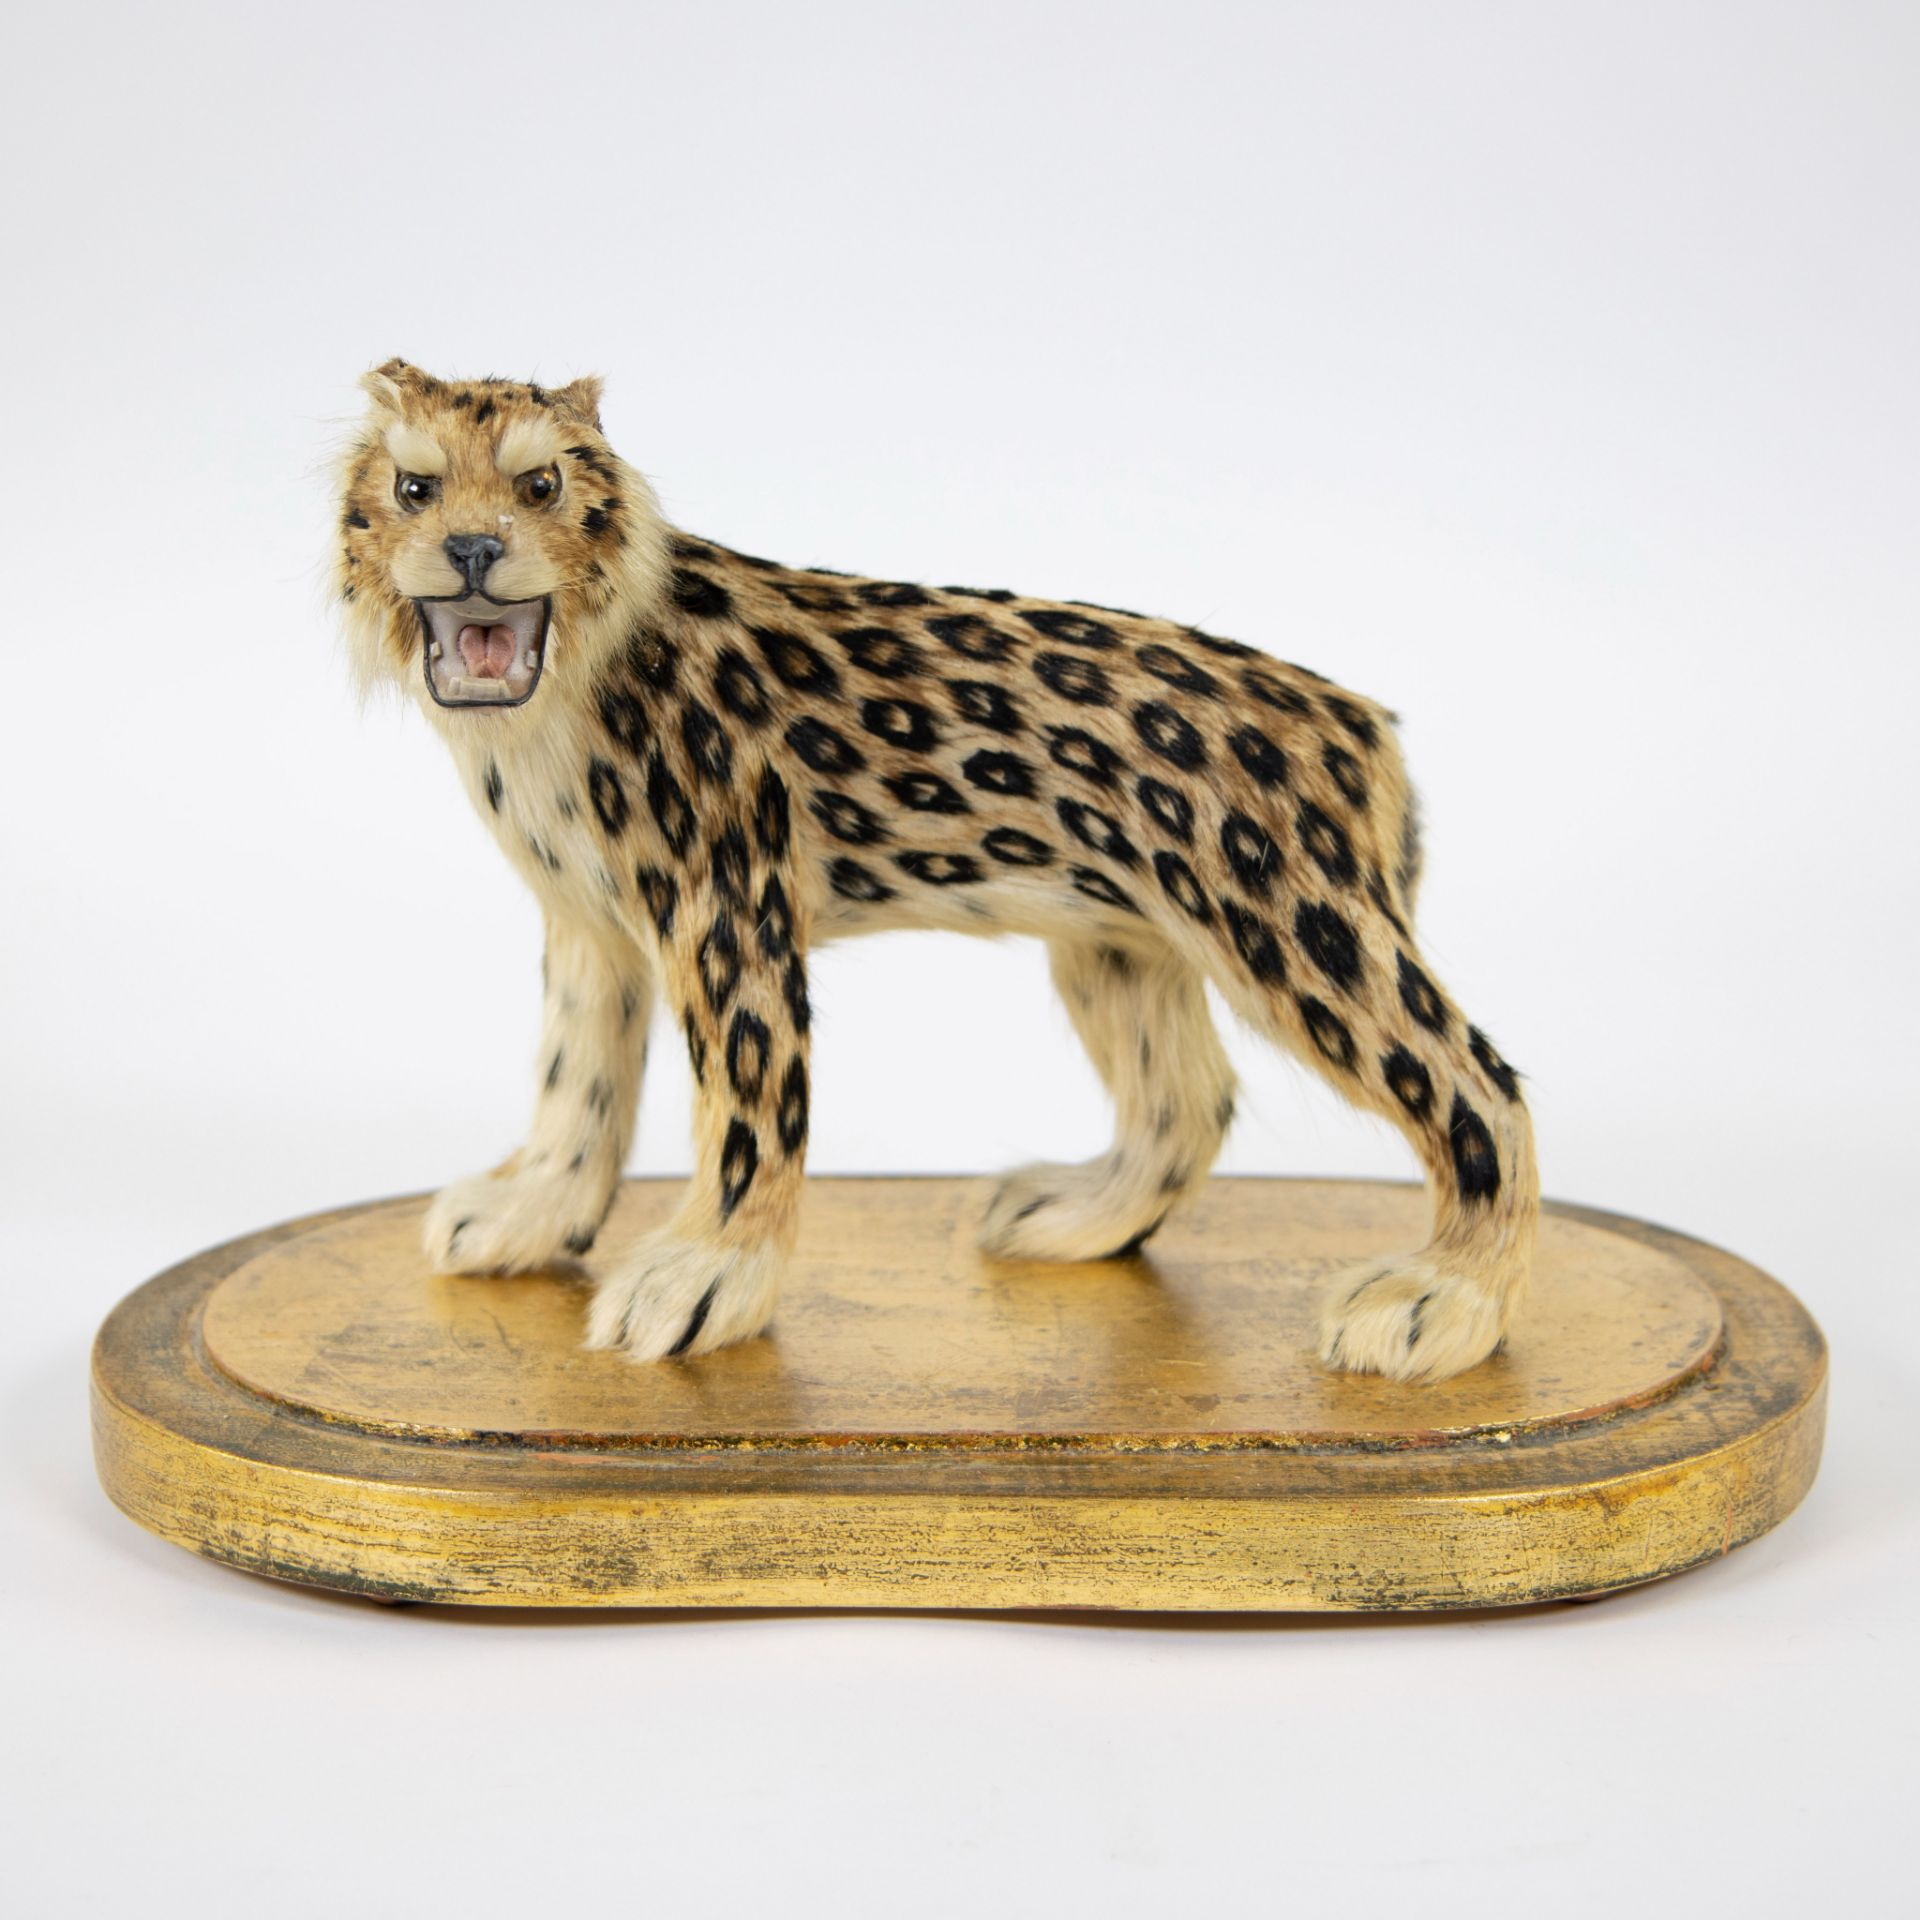 Taxidermy leopard under a bell jar - Image 2 of 5